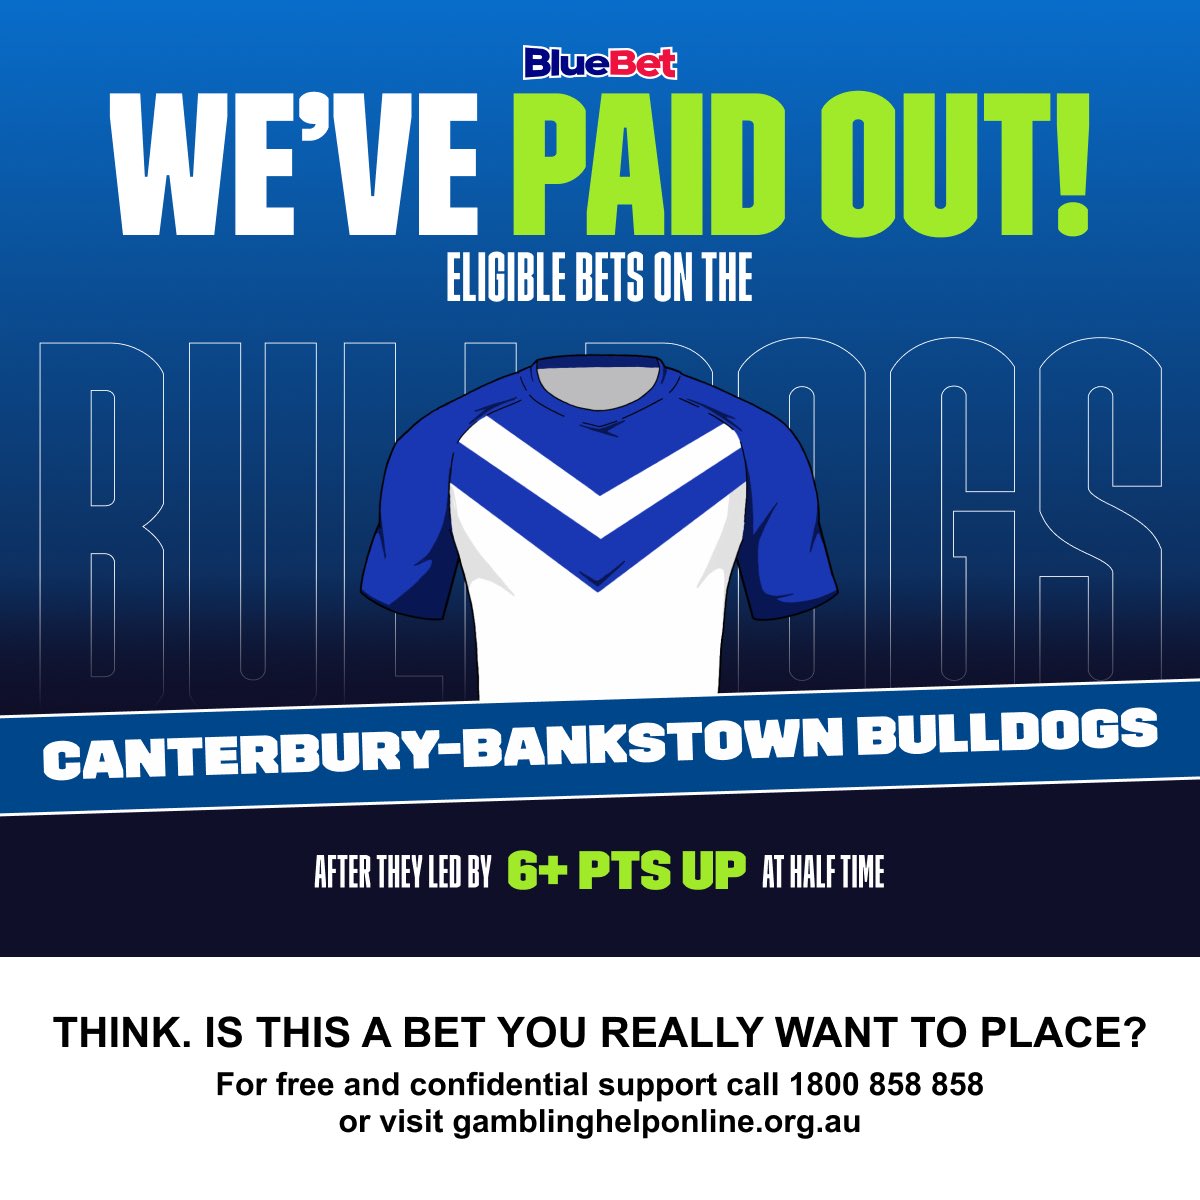 The Chooks are well and truly cooked tonight. Doggies punters, we’ve paid you out as winners at half time.